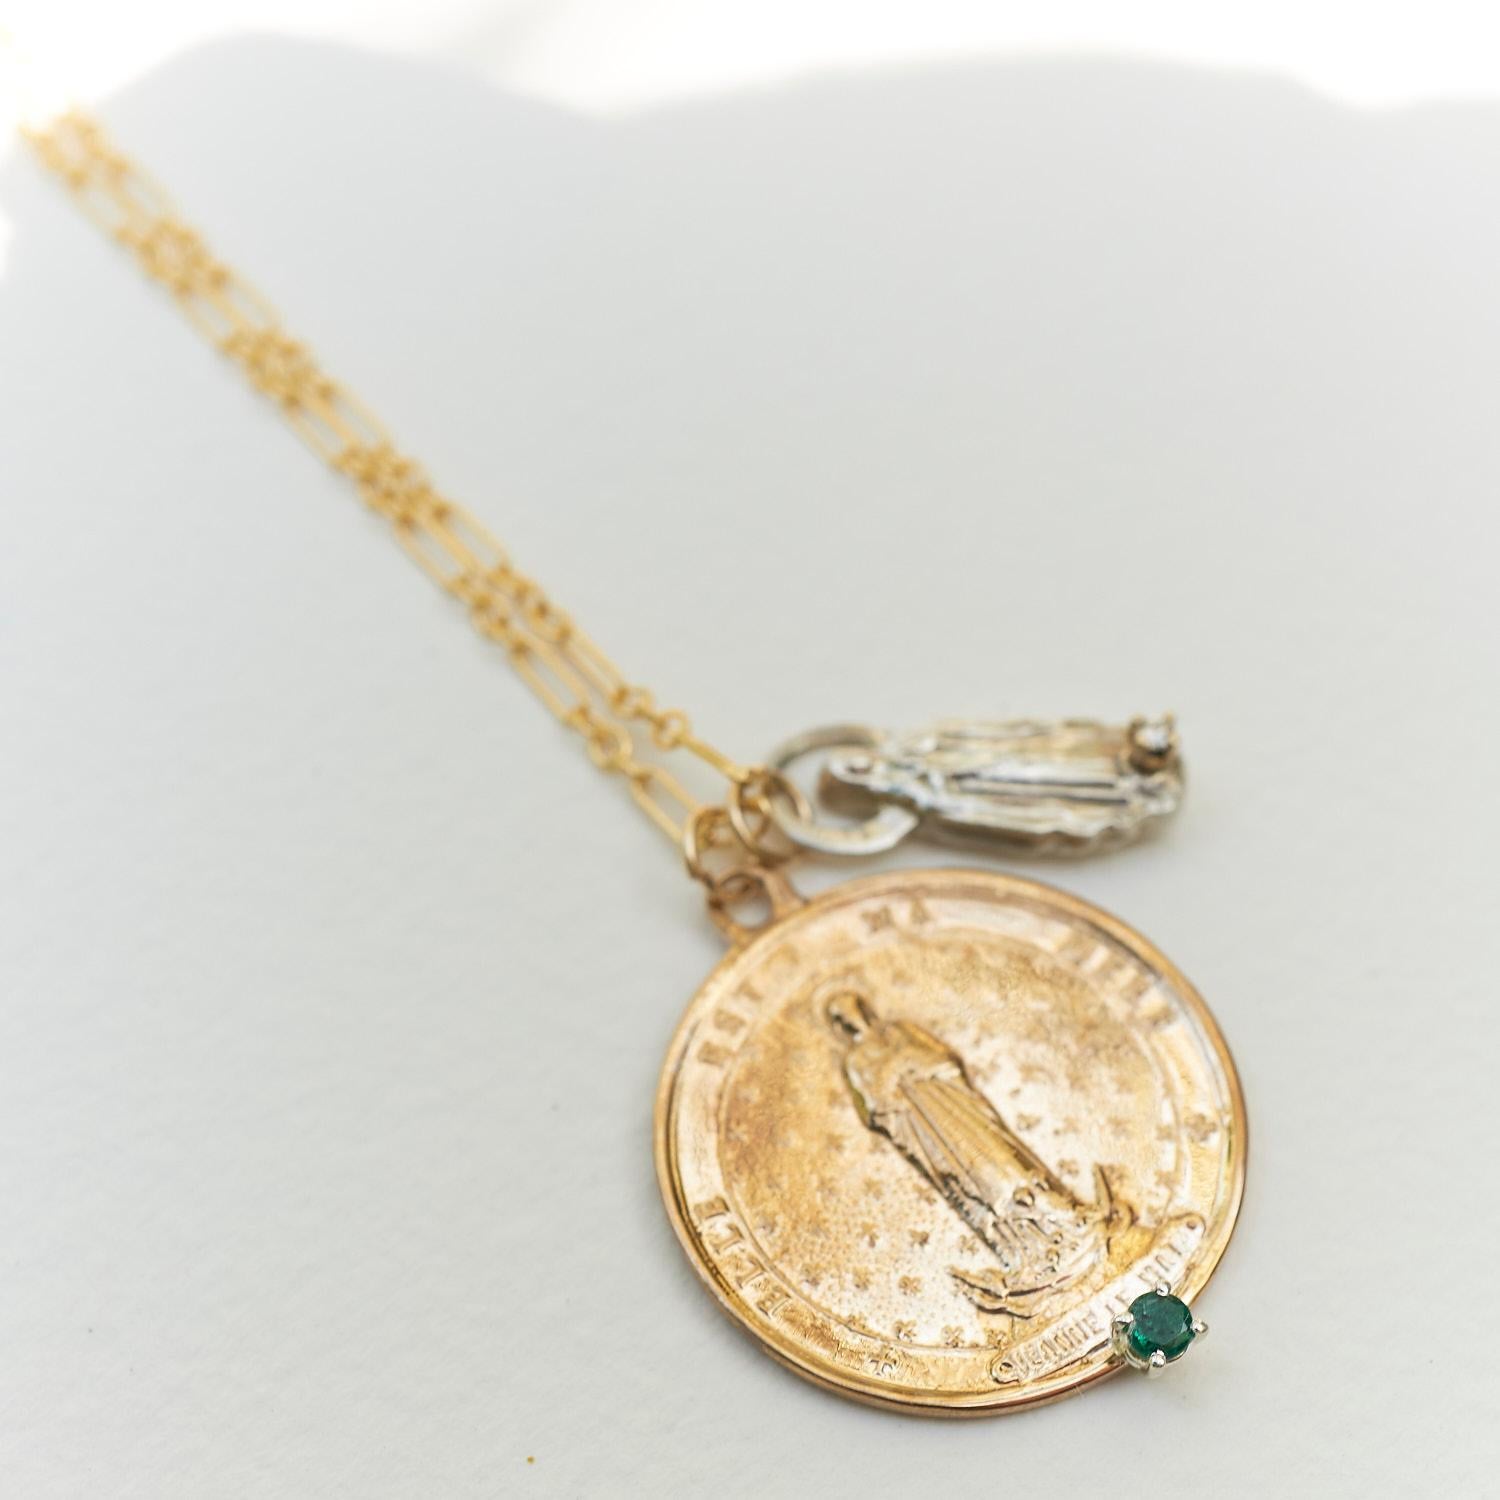 Victorian Medal Necklace Virgin Mary Emerald White Diamond Silver Bronze J Dauphin For Sale